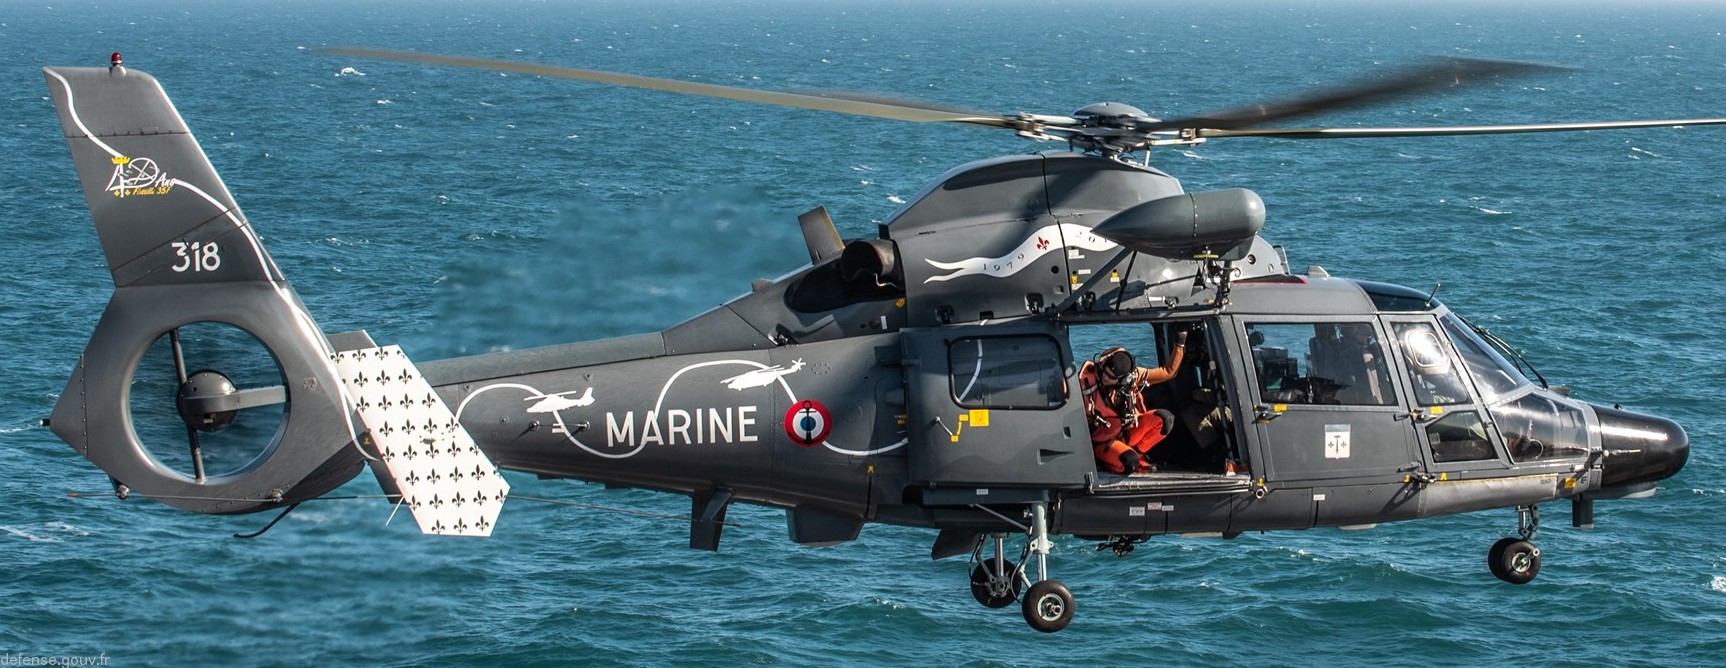 sa365f dauphin helicopter flottille 35f french navy marine nationale 6318 57